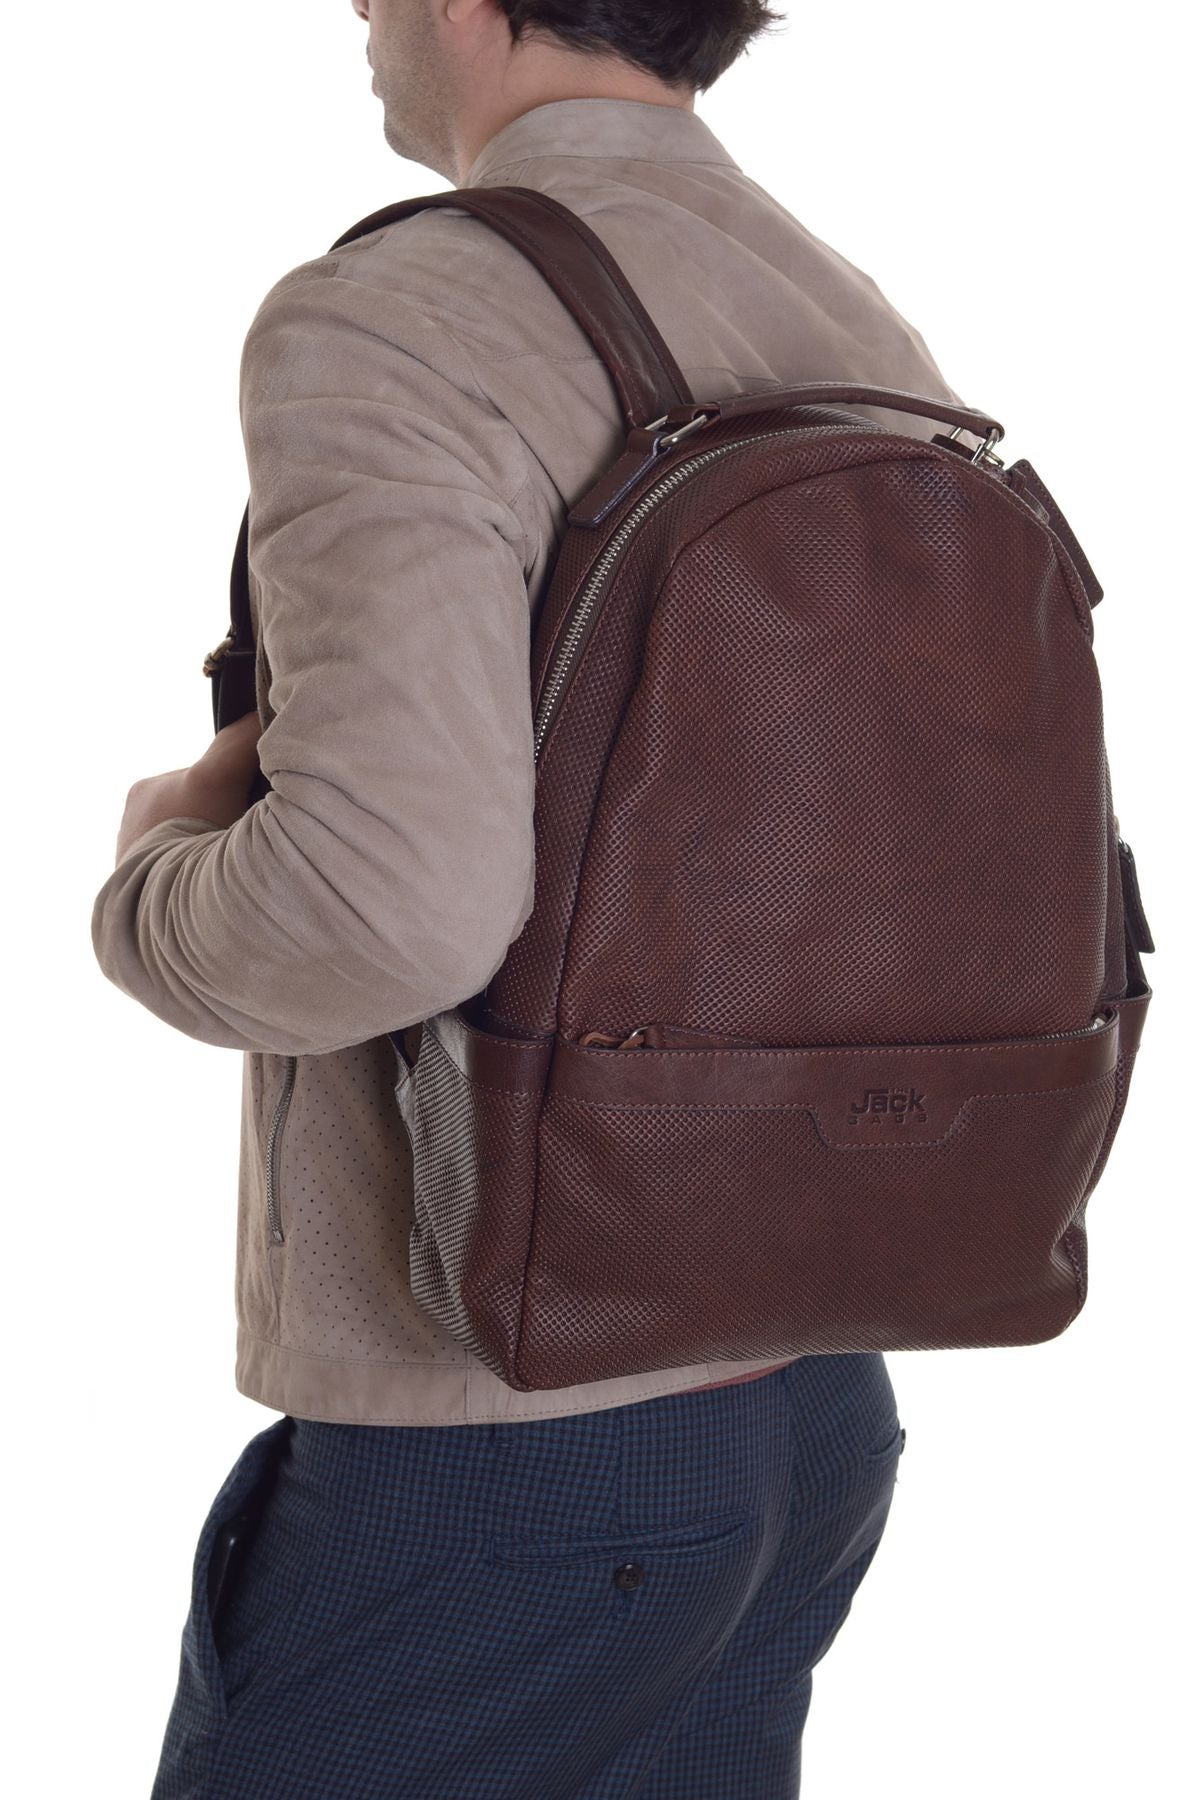 The Jack Leathers Autumn/Winter Leather Backpacks